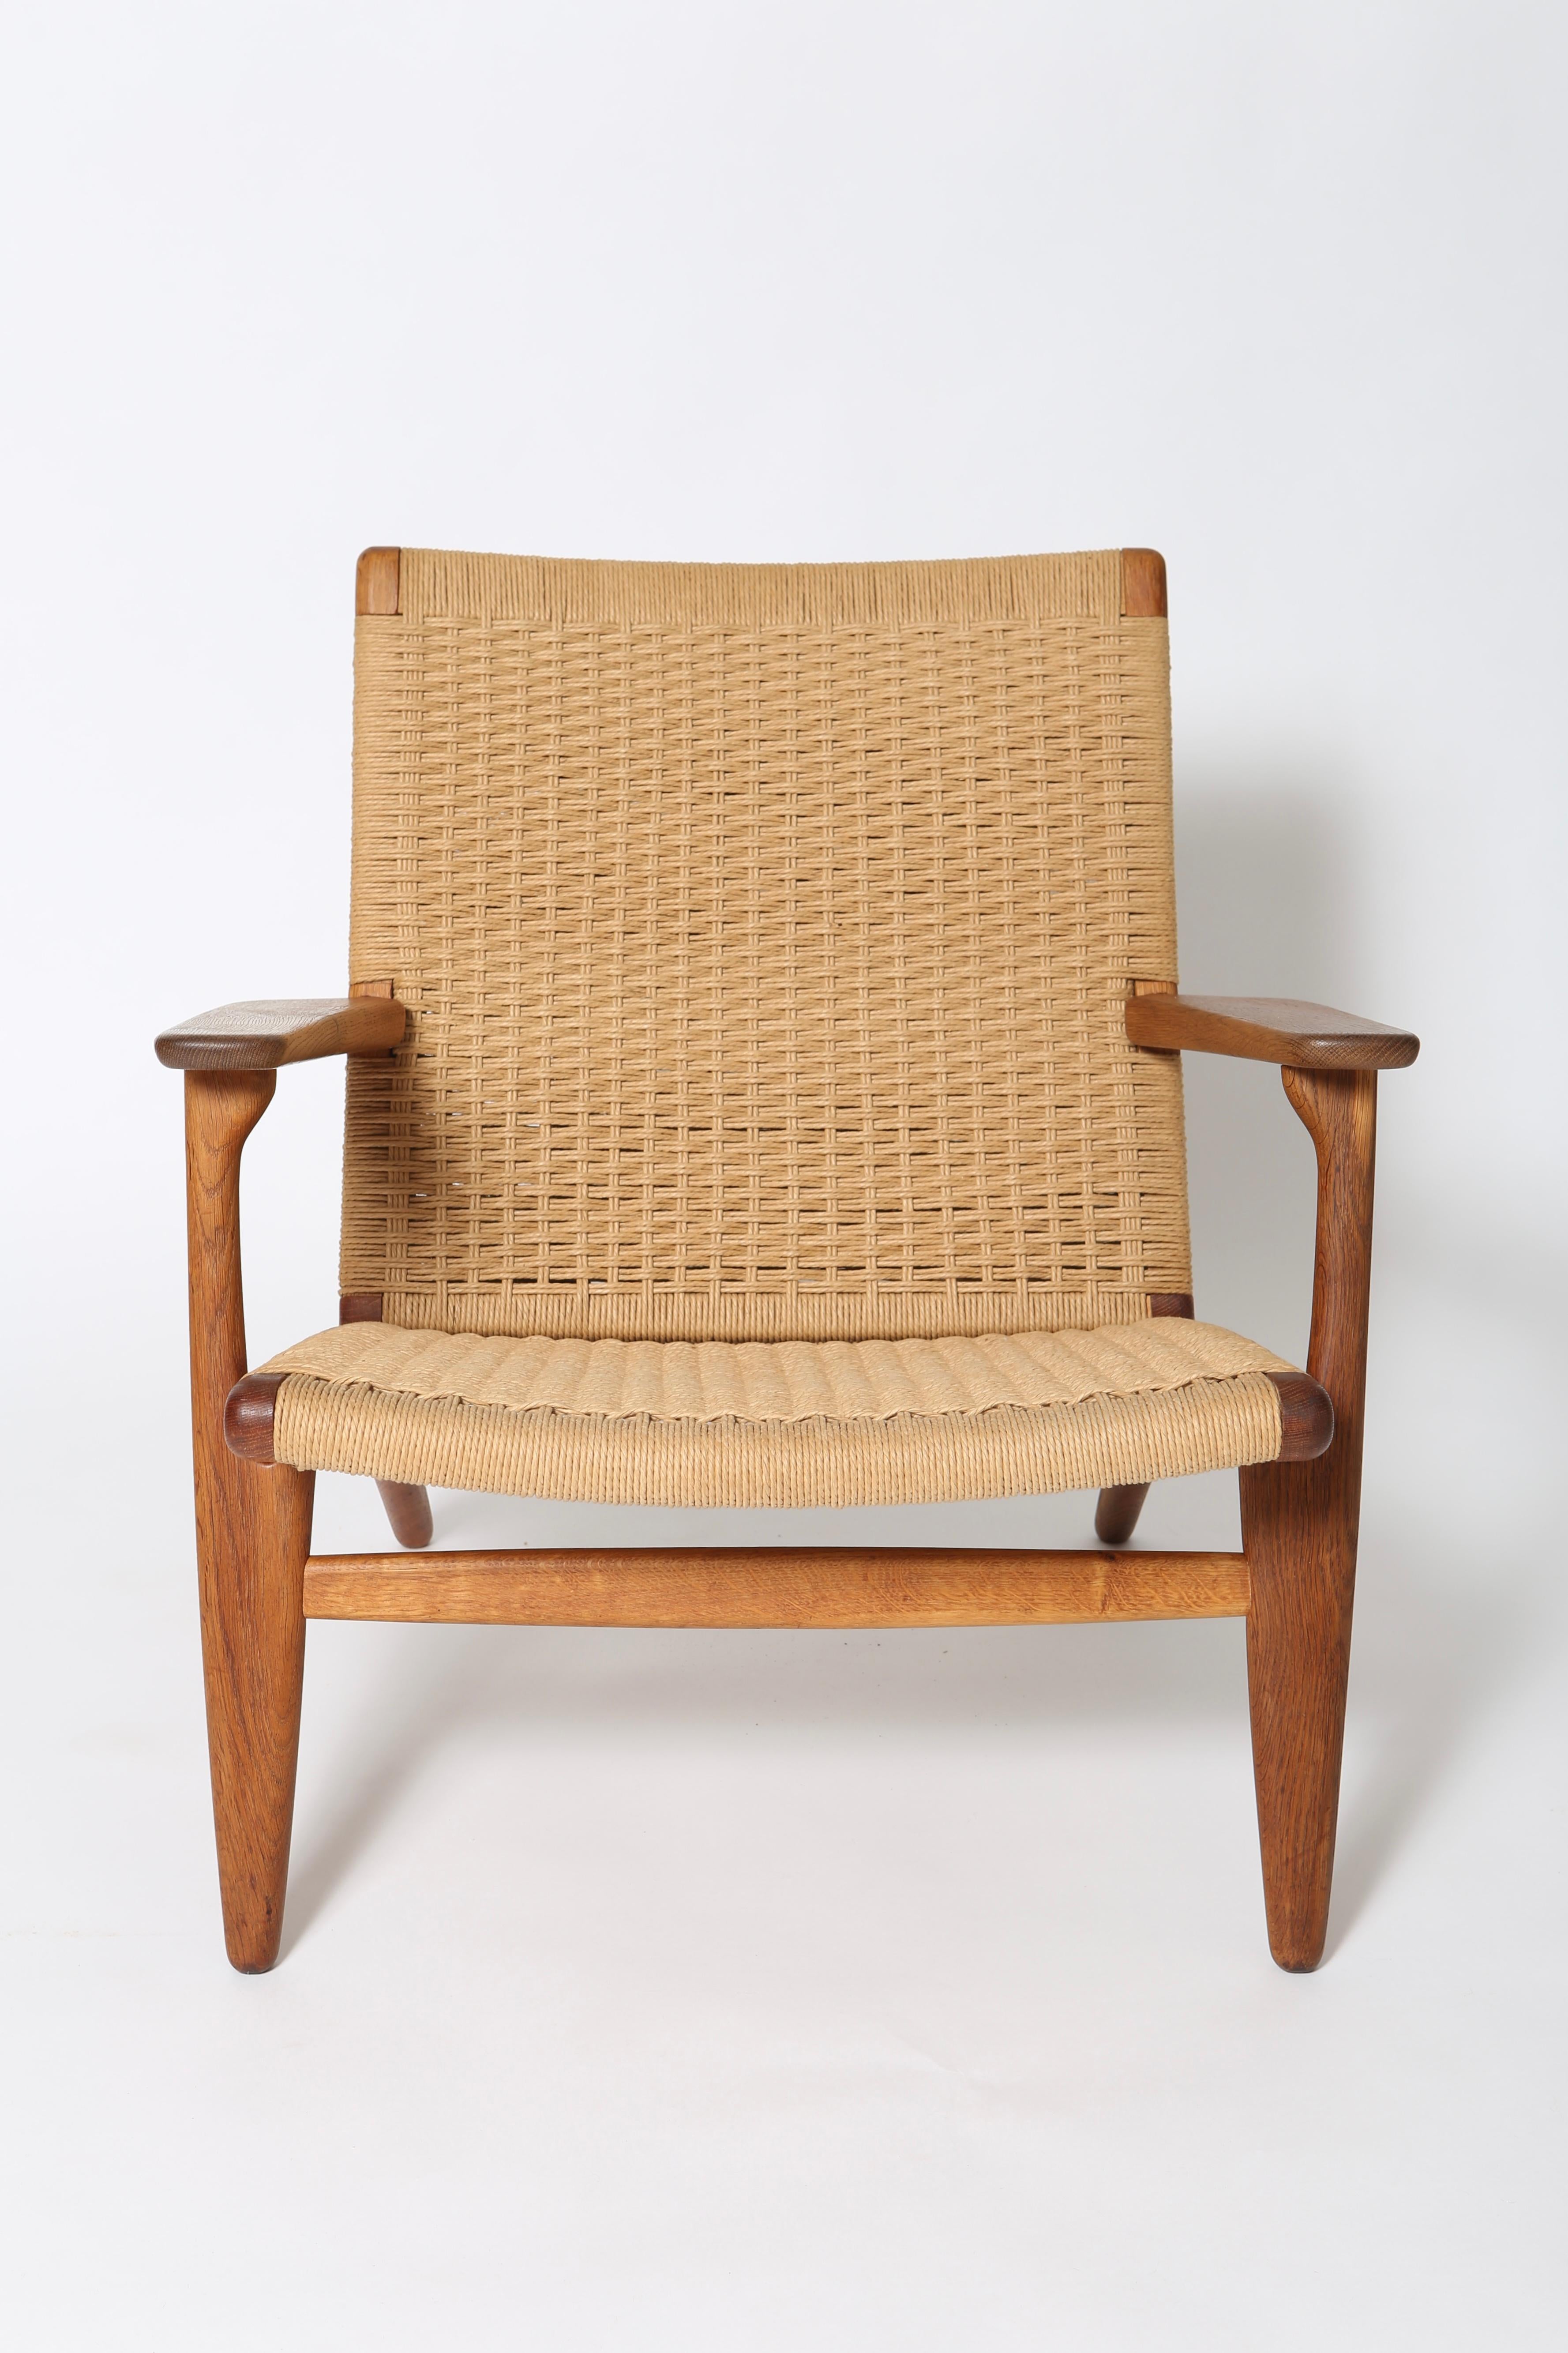 Iconic CH25 easy chair in oak by Hans J. Wegner. Early example, dates to the mid 1950s. Papercord intact and free from stains or abrasion. Frame shows nice age-appropriate patina. In excellent condition, this chair will be a family heirloom as it’s